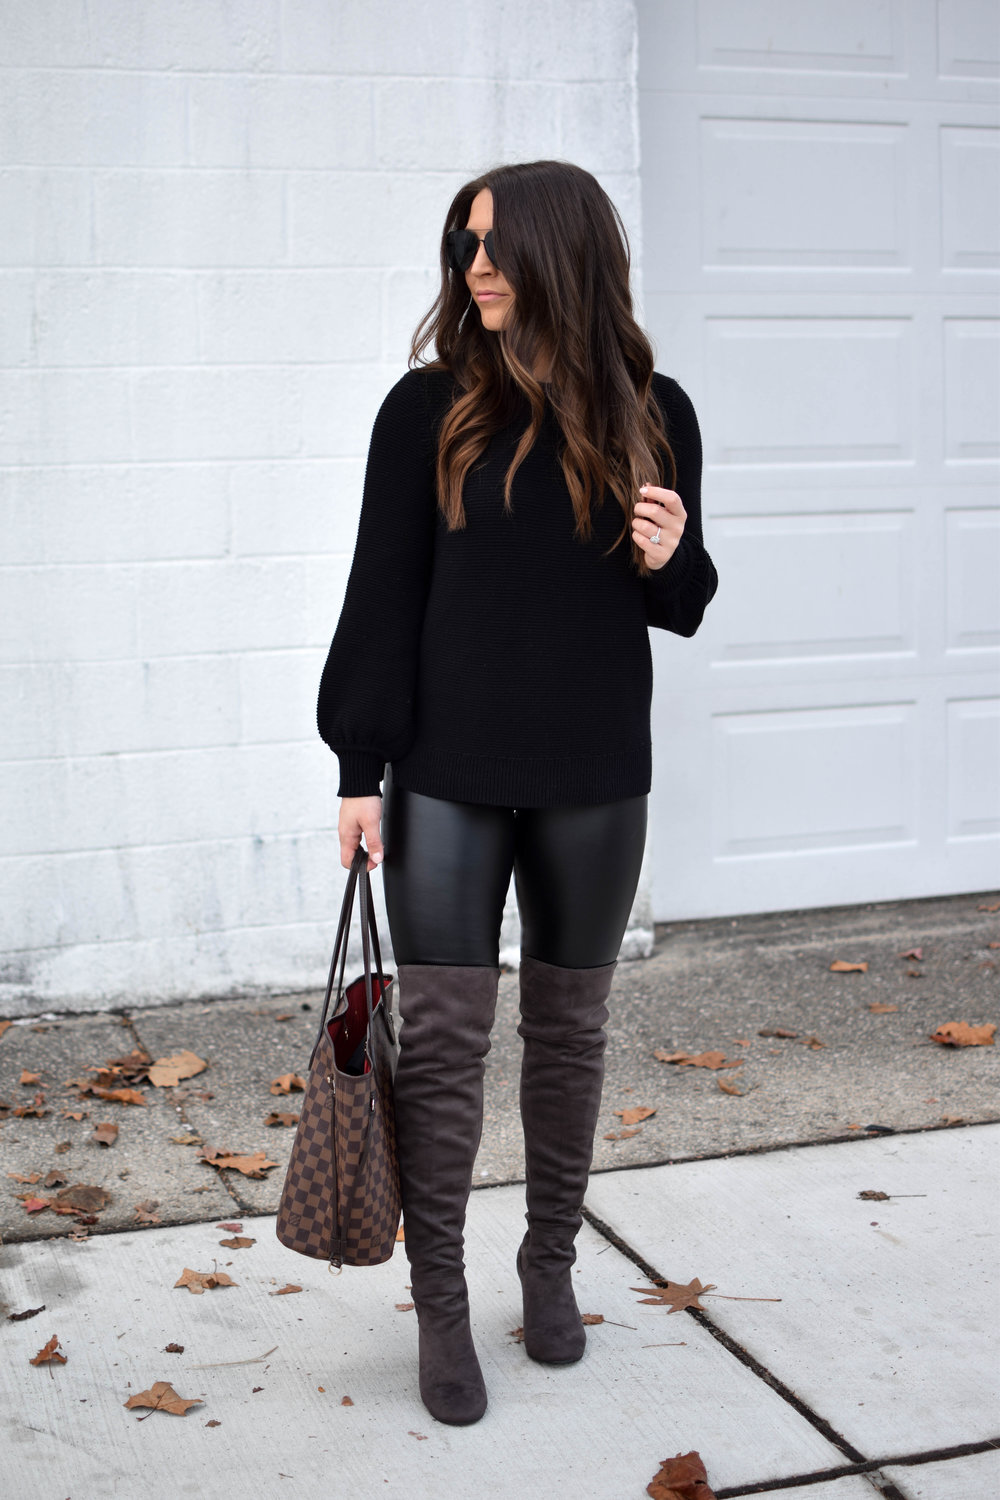 Winter Date Night Outfits - The Motherchic